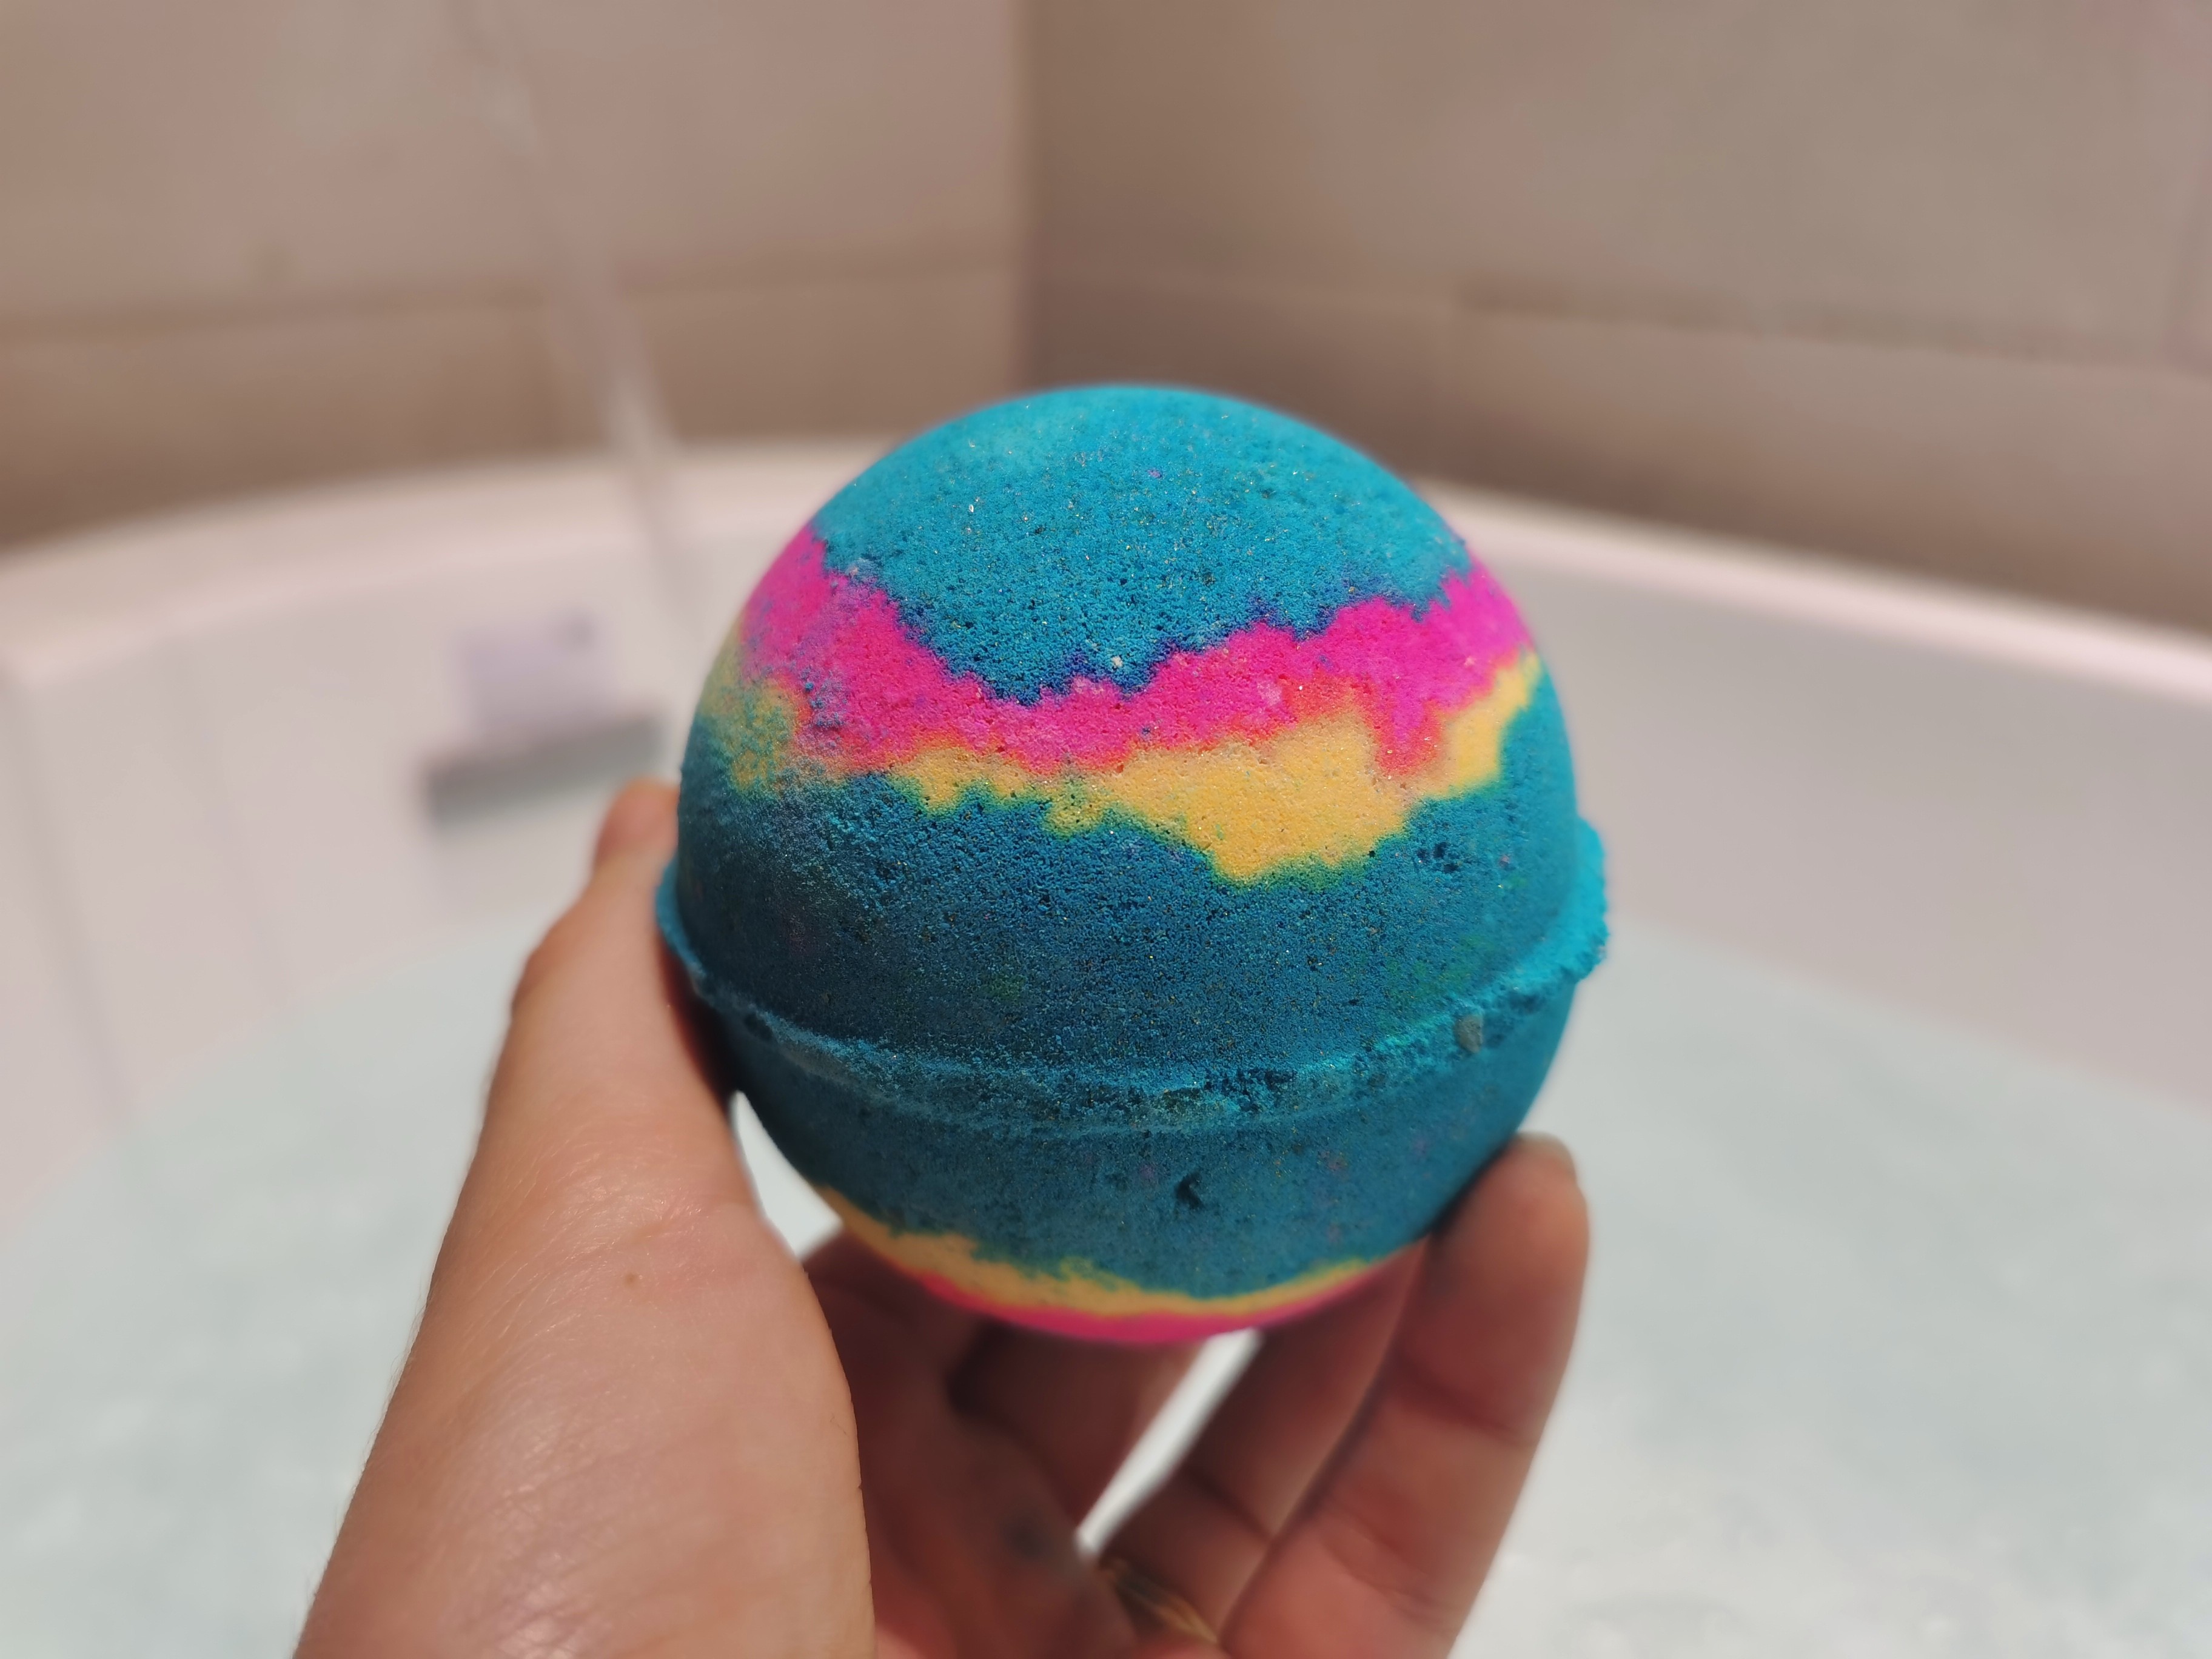 Intergalactic Bath Bomb by Lush in front of a bath filling with water